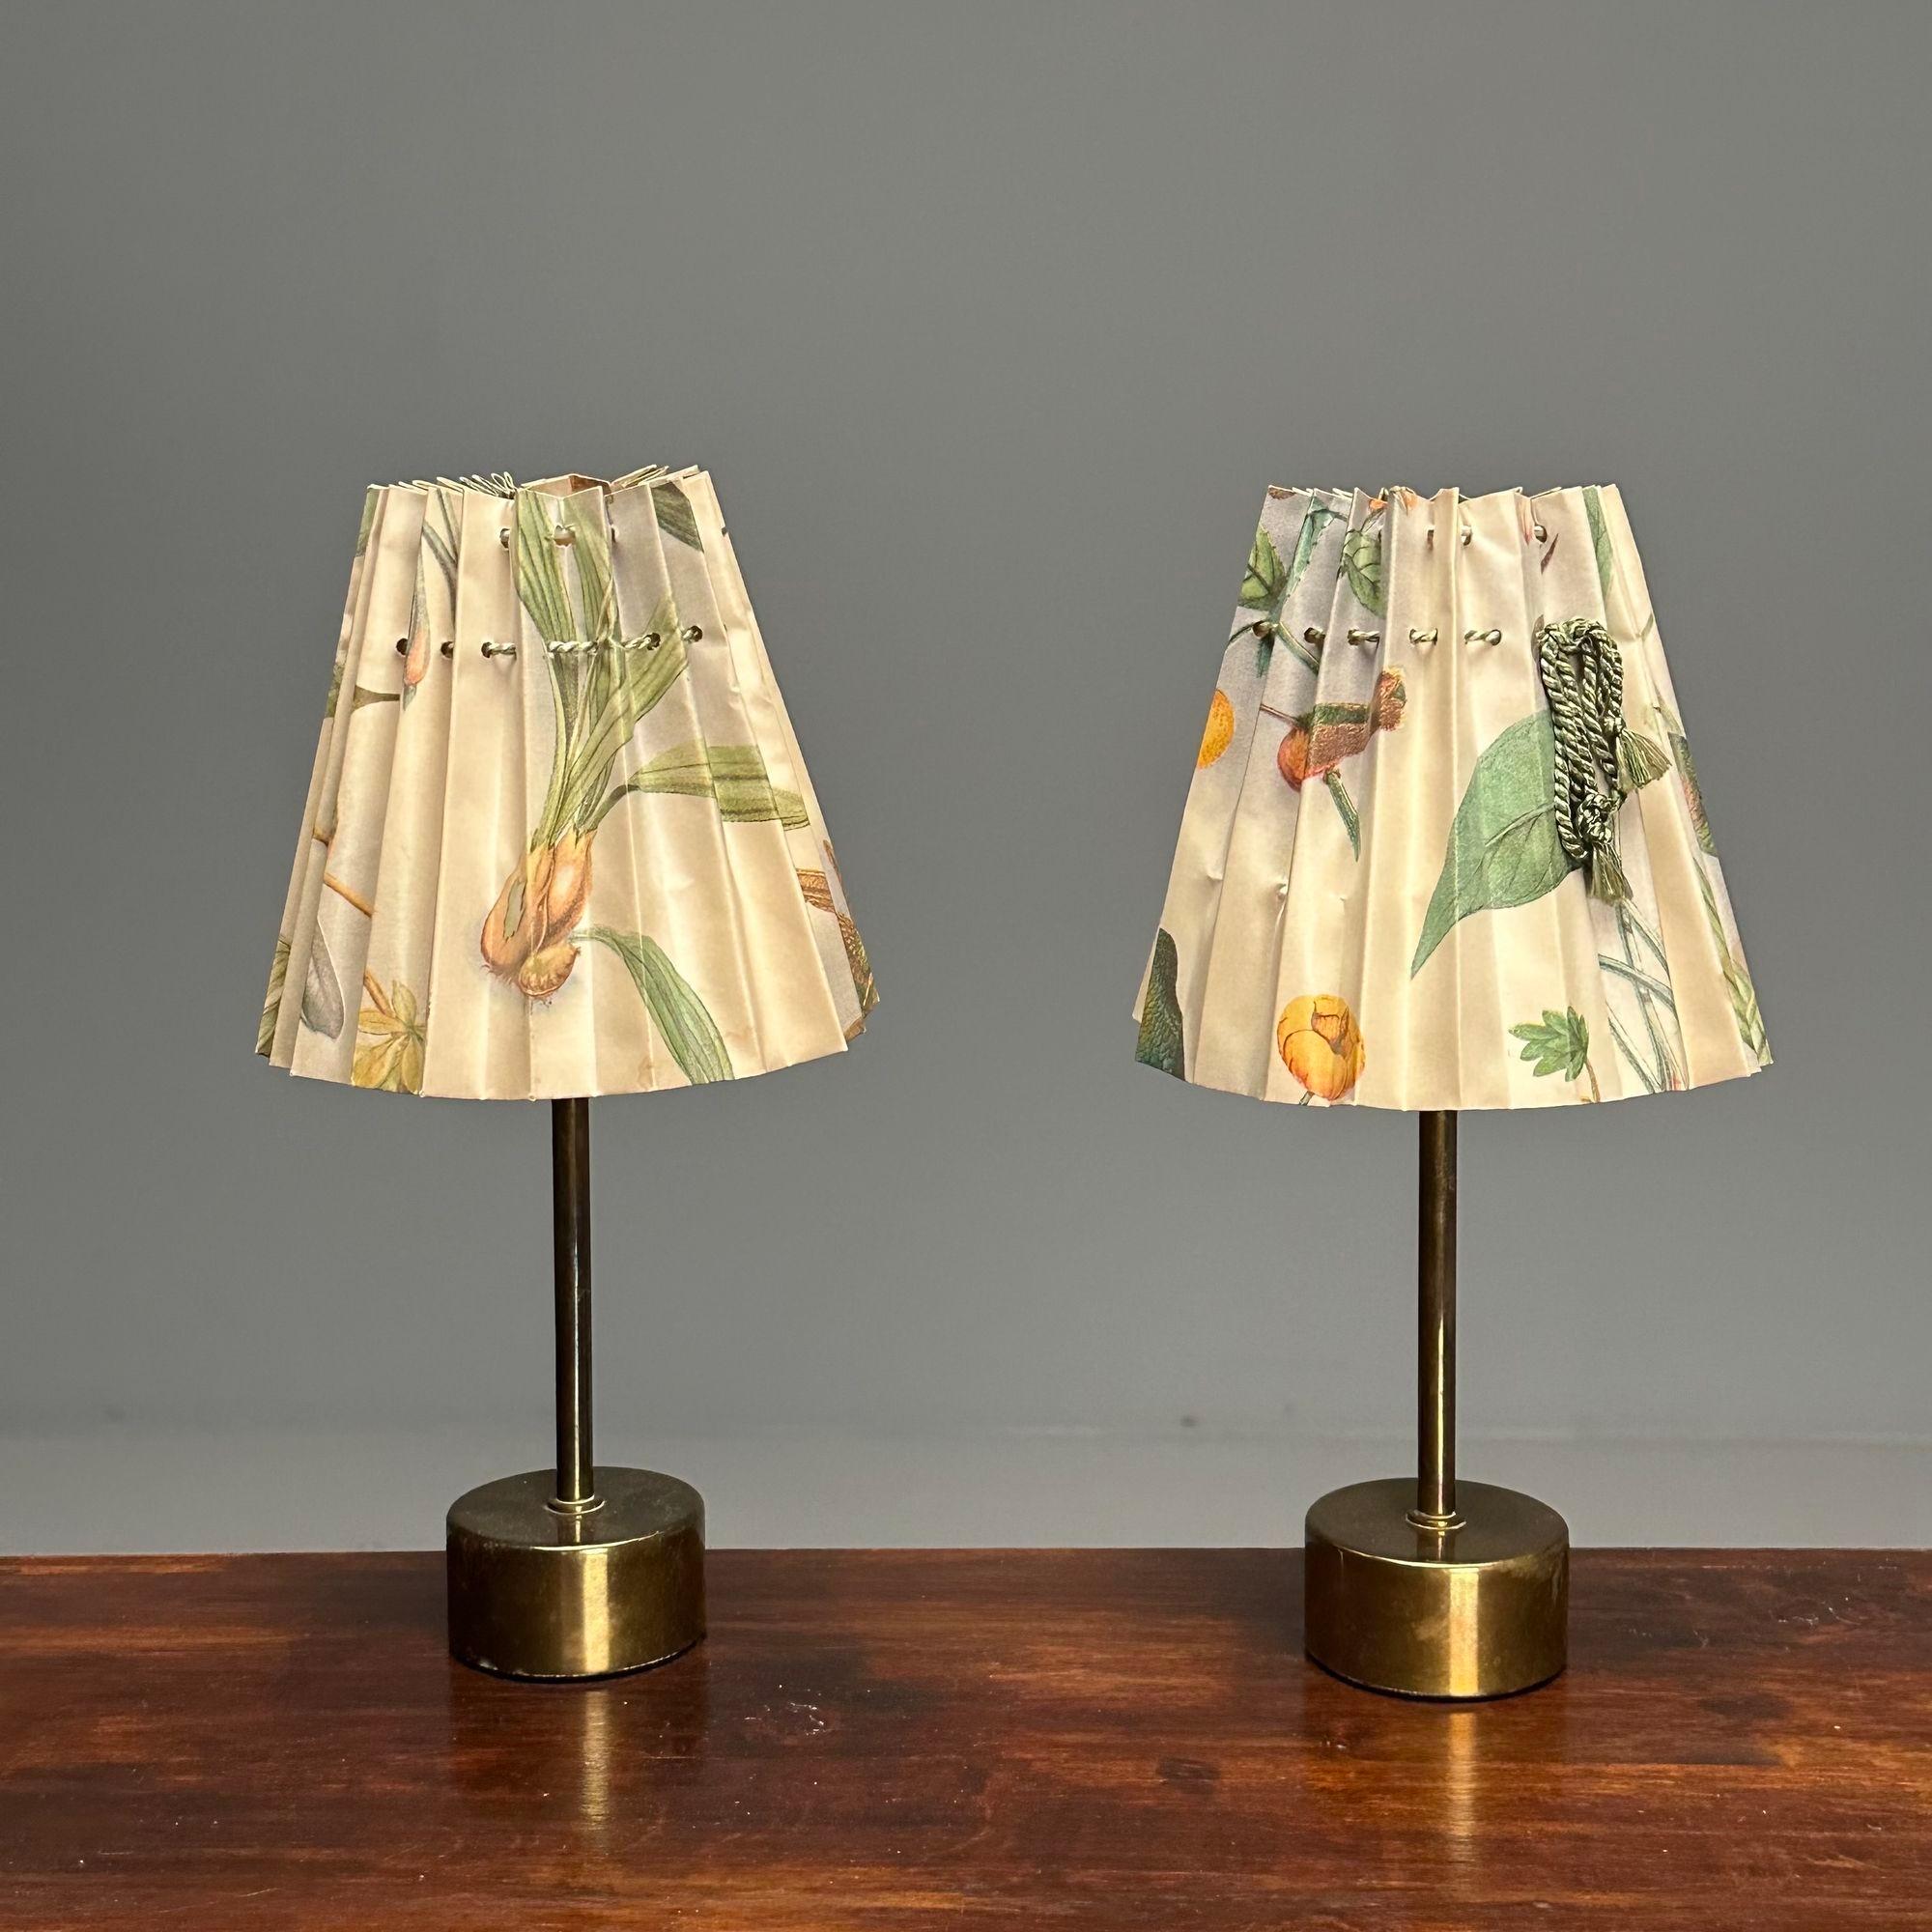 ASEA, Swedish Mid-Century Modern Table Lamps, Brass, Floral Shades, Sweden 1950s In Good Condition For Sale In Stamford, CT